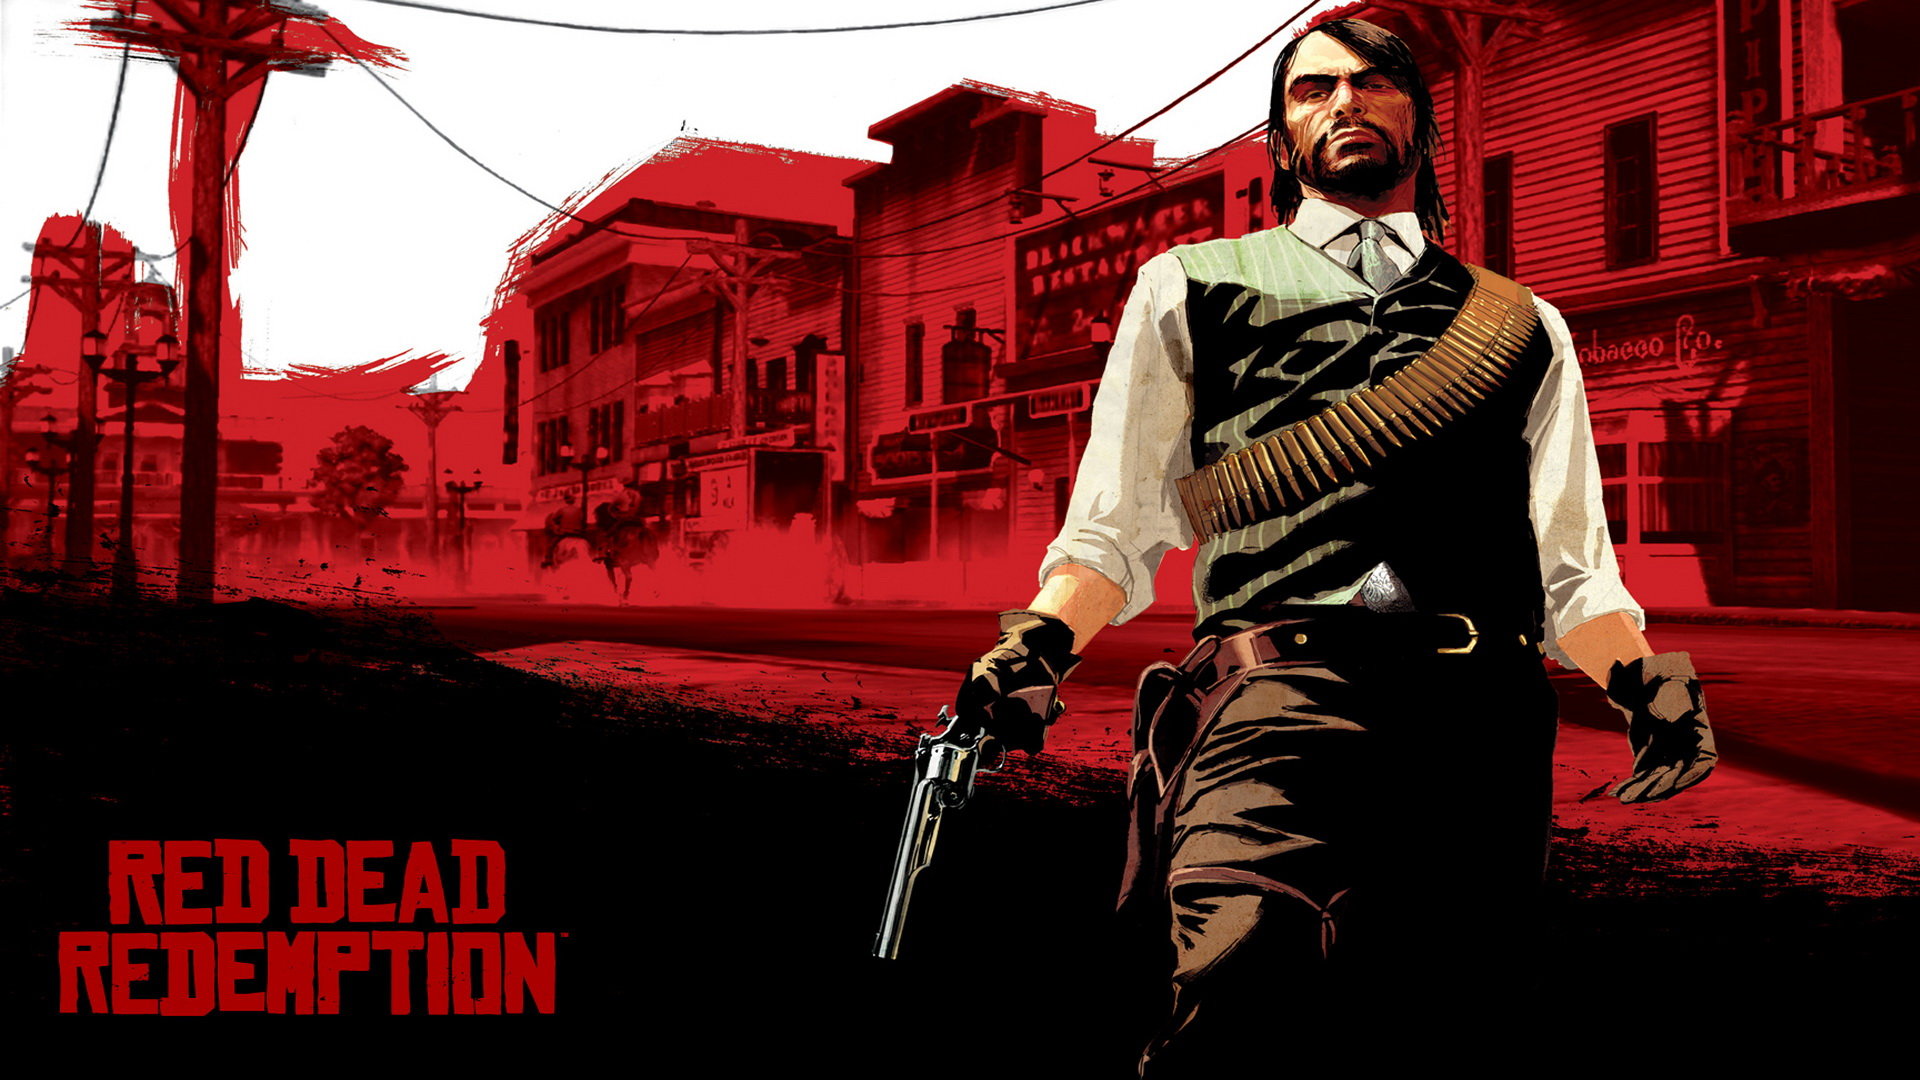 Download hd 1920x1080 Red Dead Redemption computer wallpaper ID:431985 for free